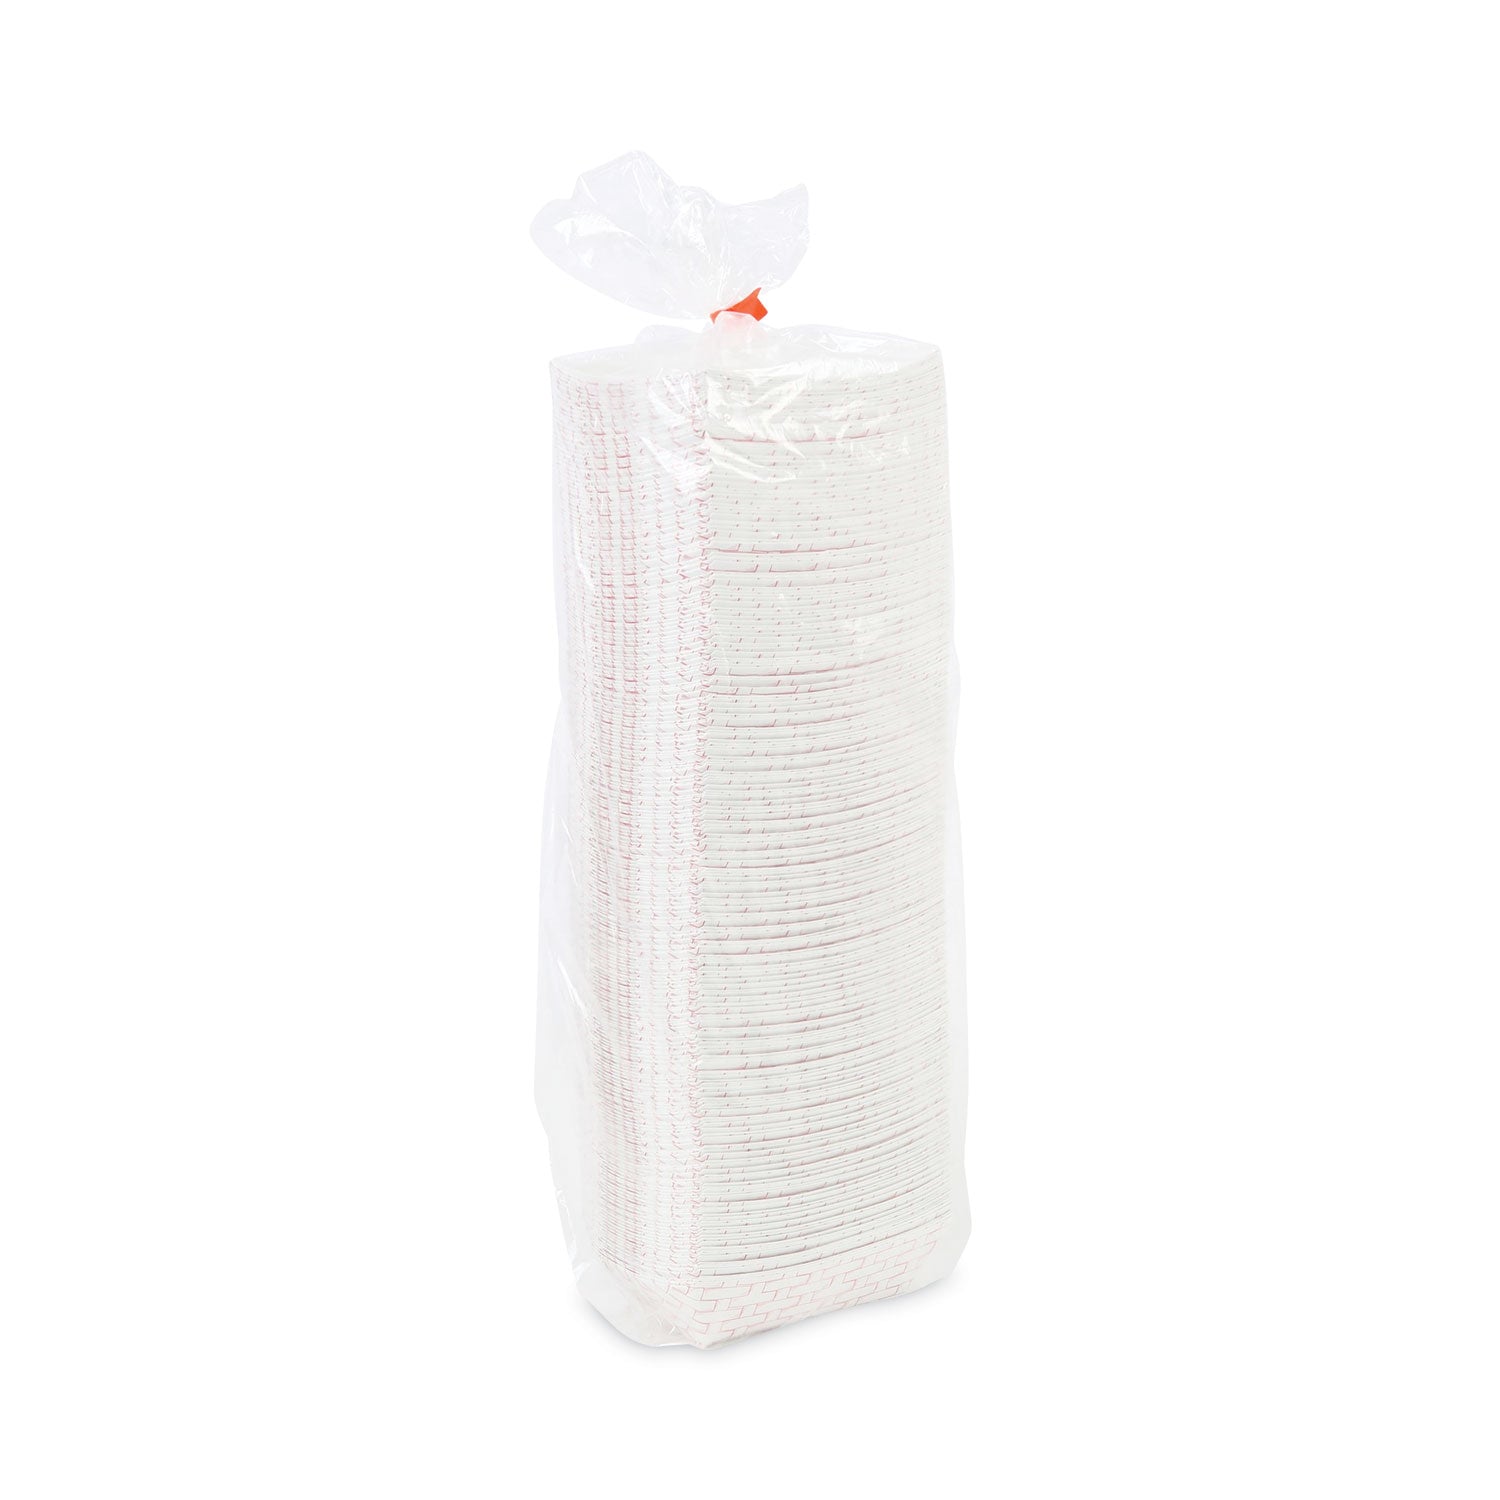 Paper Food Baskets, 0.5 lb Capacity, Red/White, 1,000/Carton - 